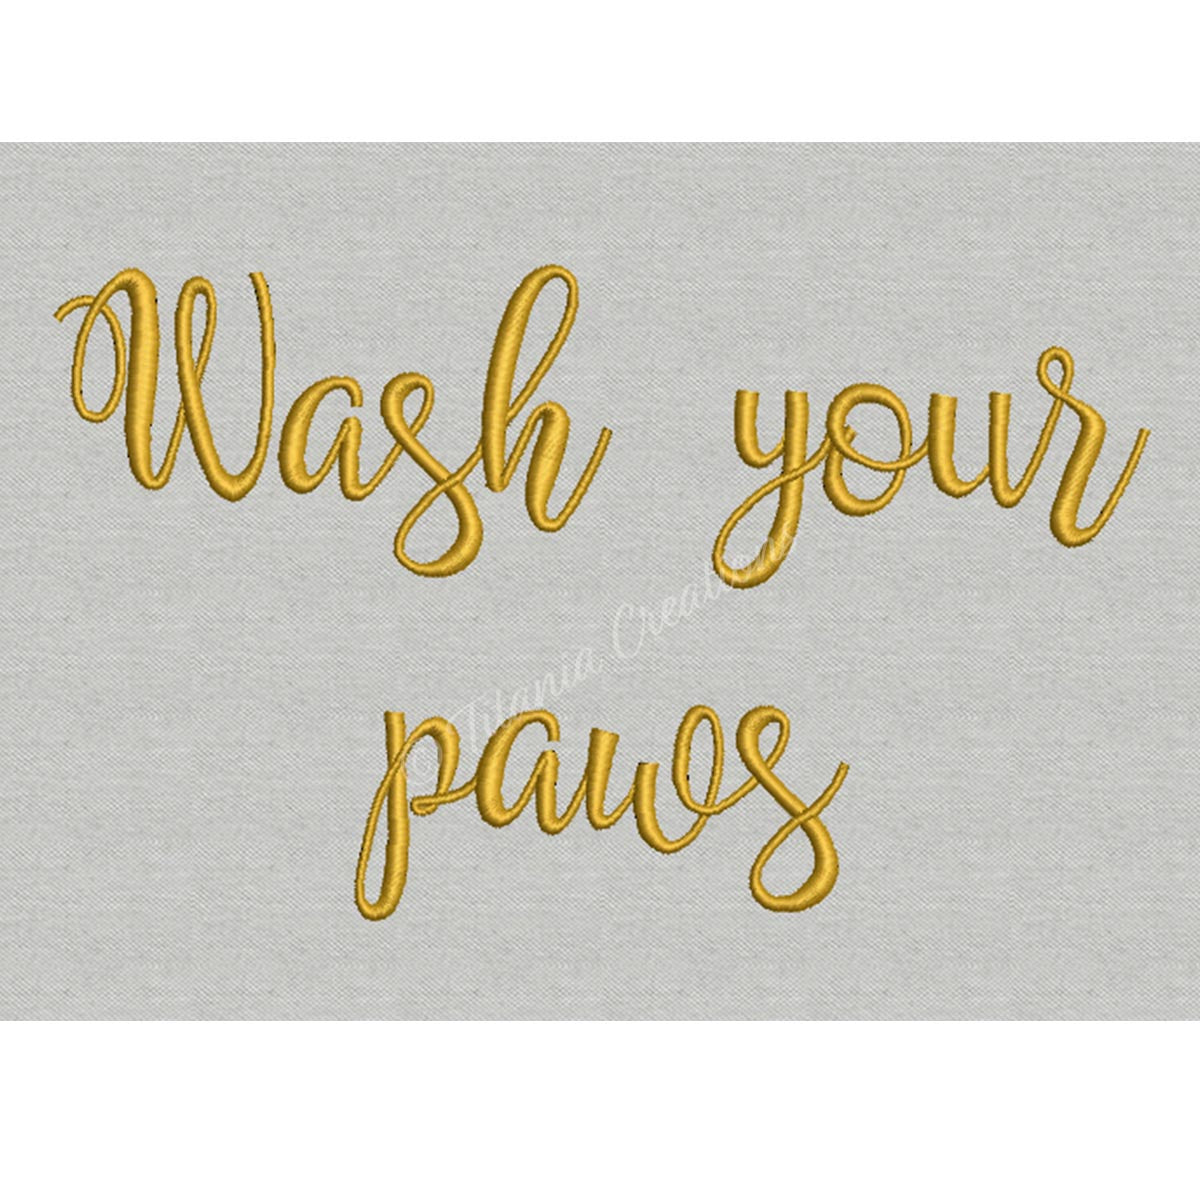 Wash Your Paws Quote 5x7